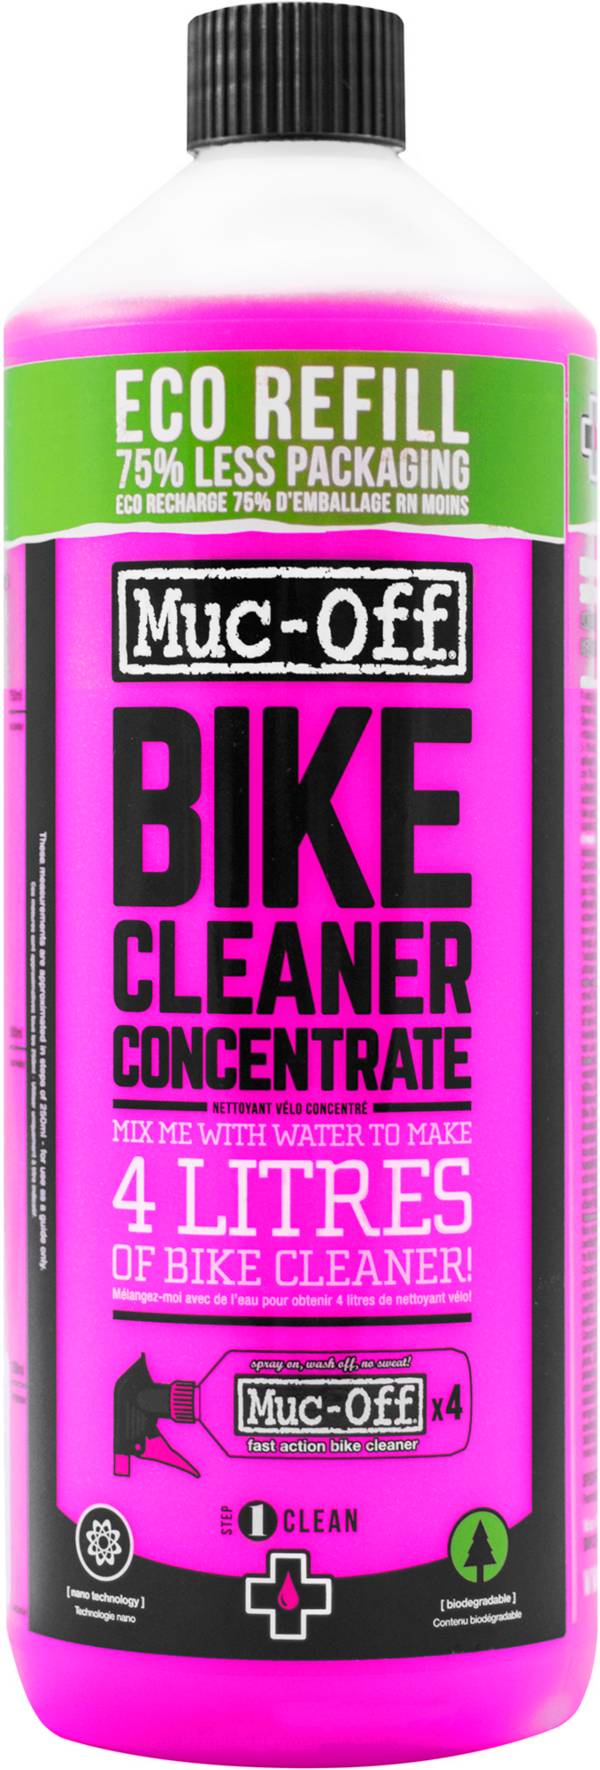 Muc-Off 1-Liter Nano Tech Bike Cleaner Concentrate product image